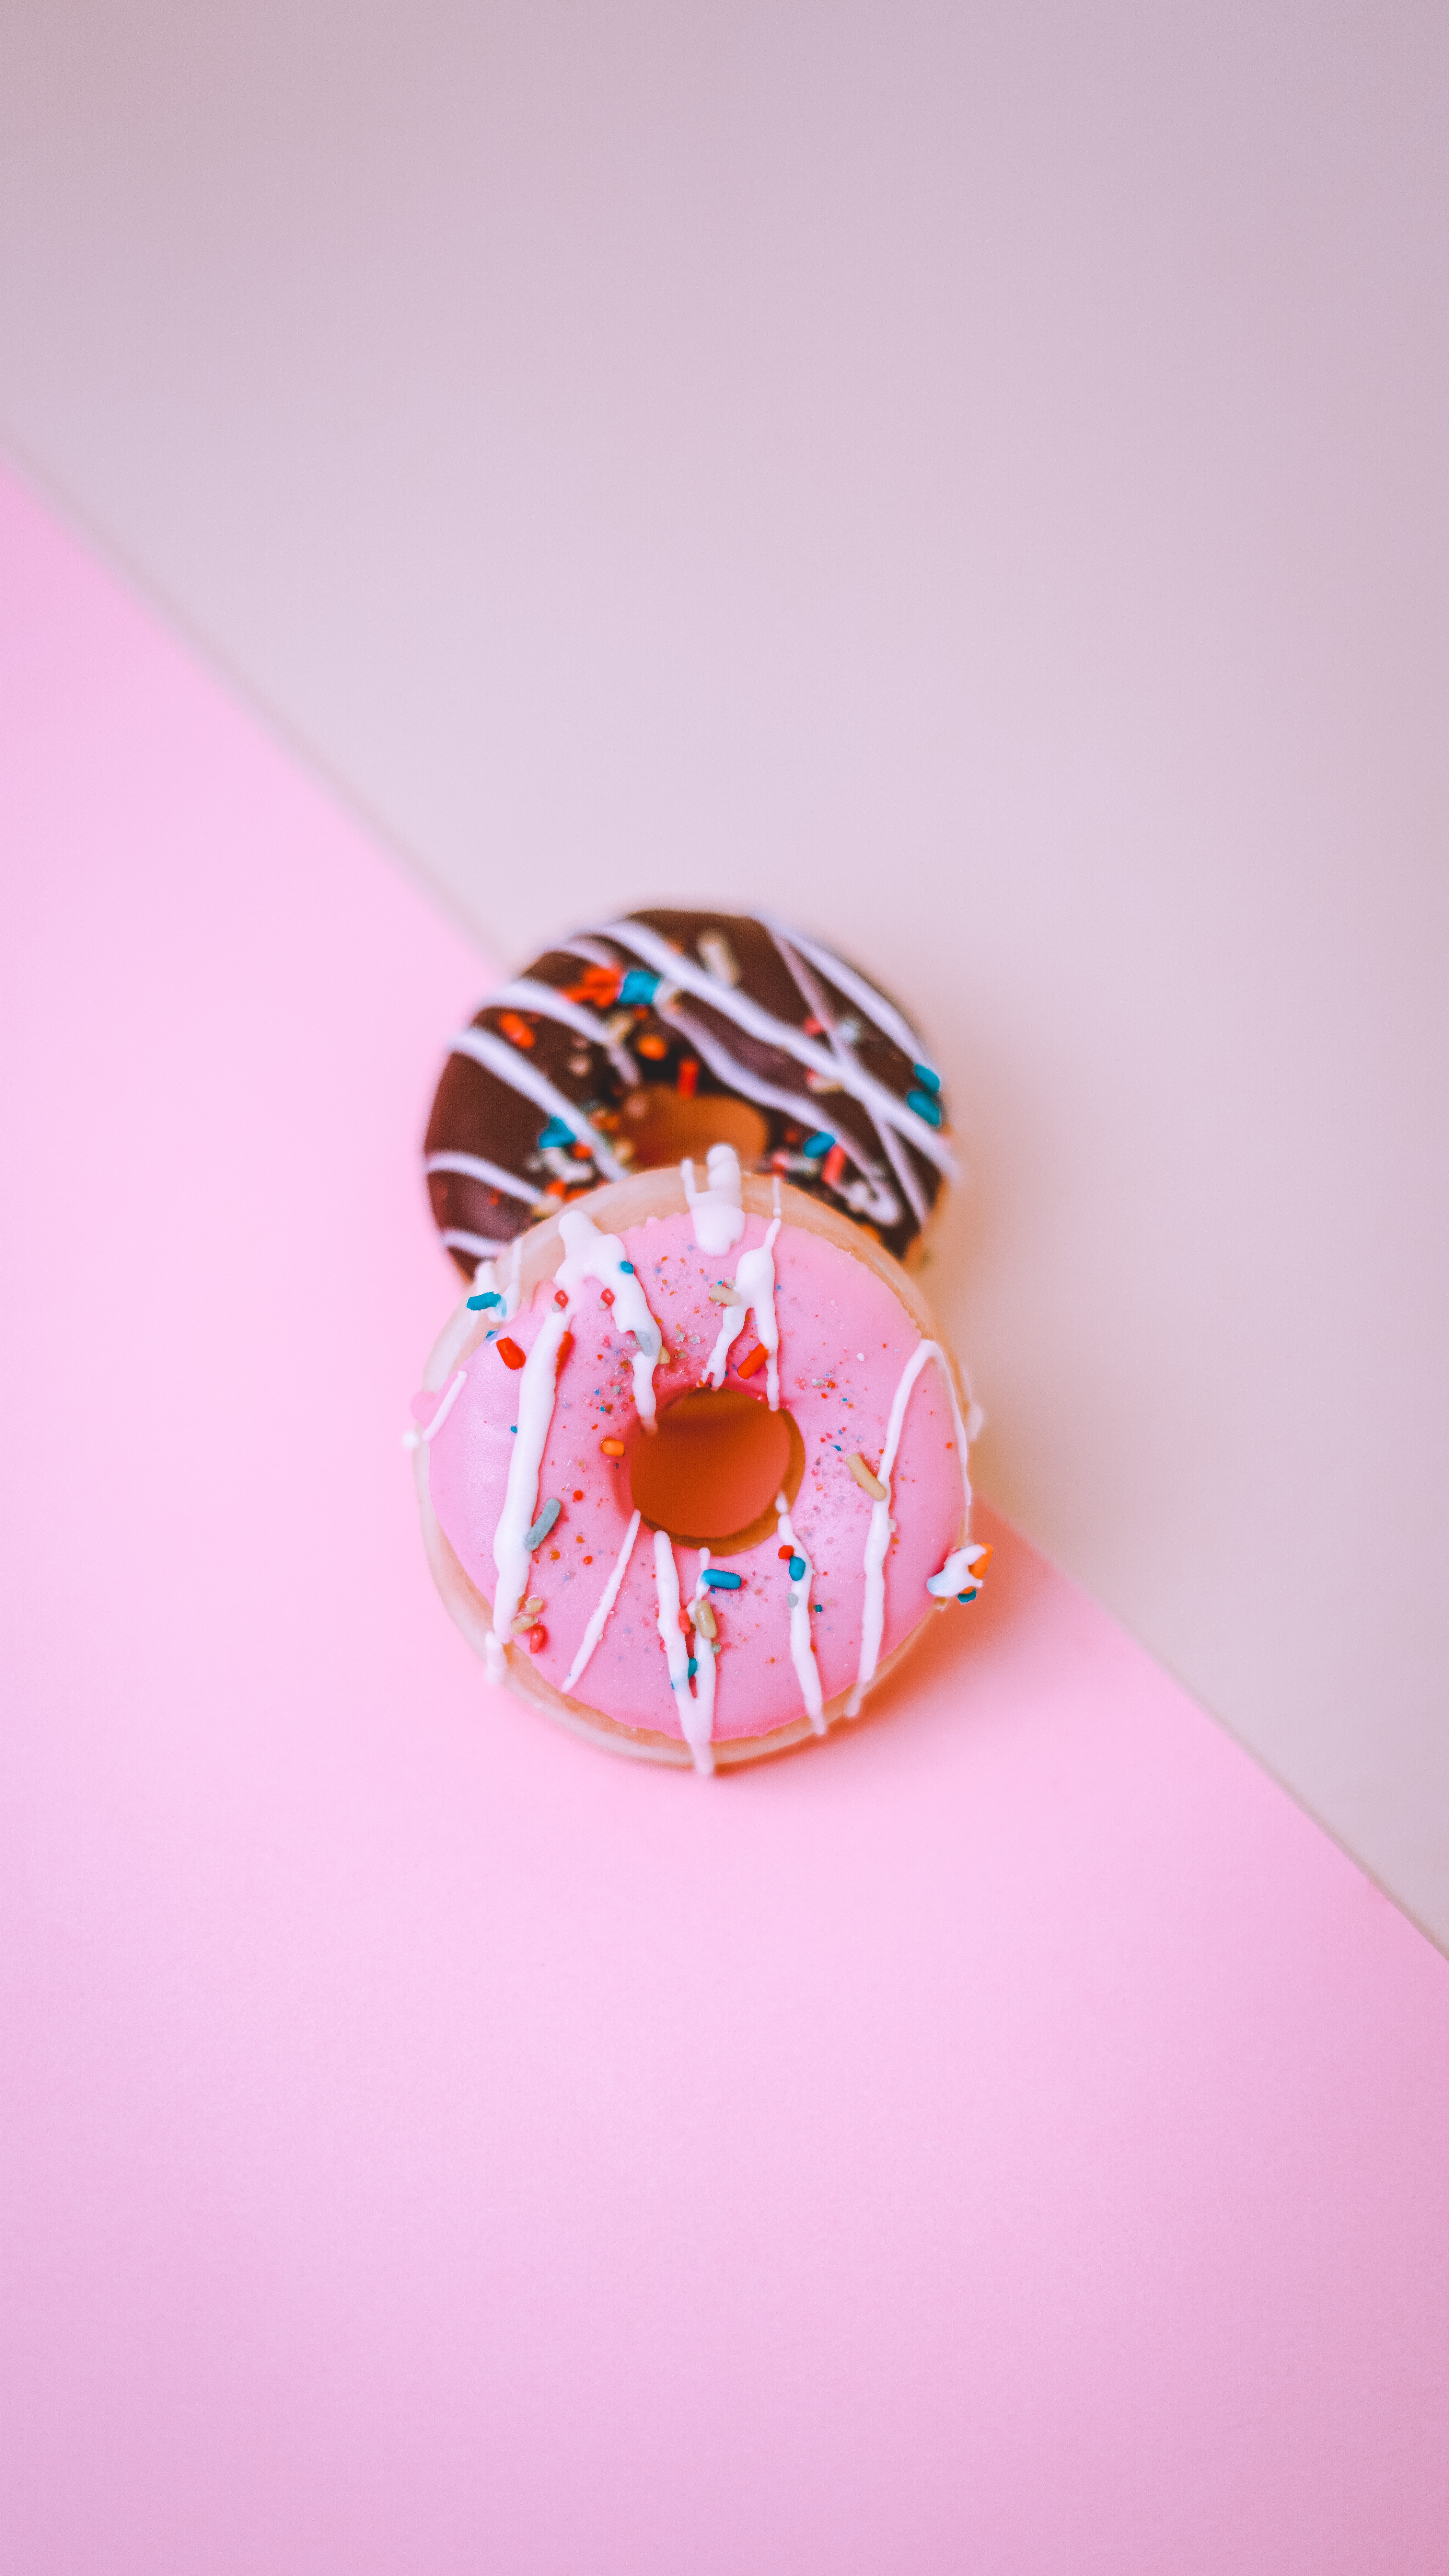 131815 Screensavers and Wallpapers Donuts for phone. Download food, desert, bakery products, baking, sweets, donuts pictures for free